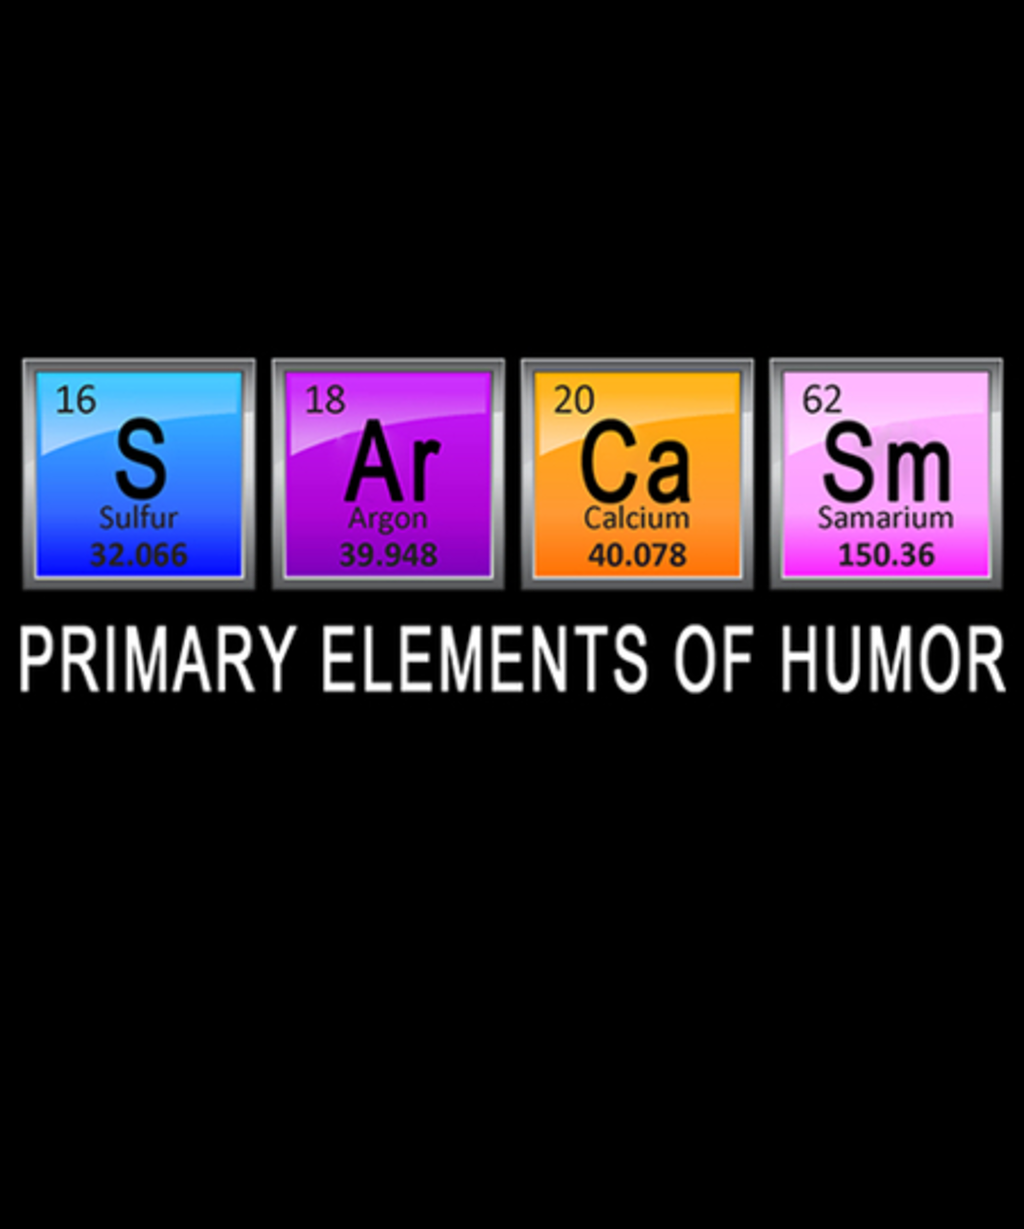 Sarcasm_primary-elements-of-humor.png